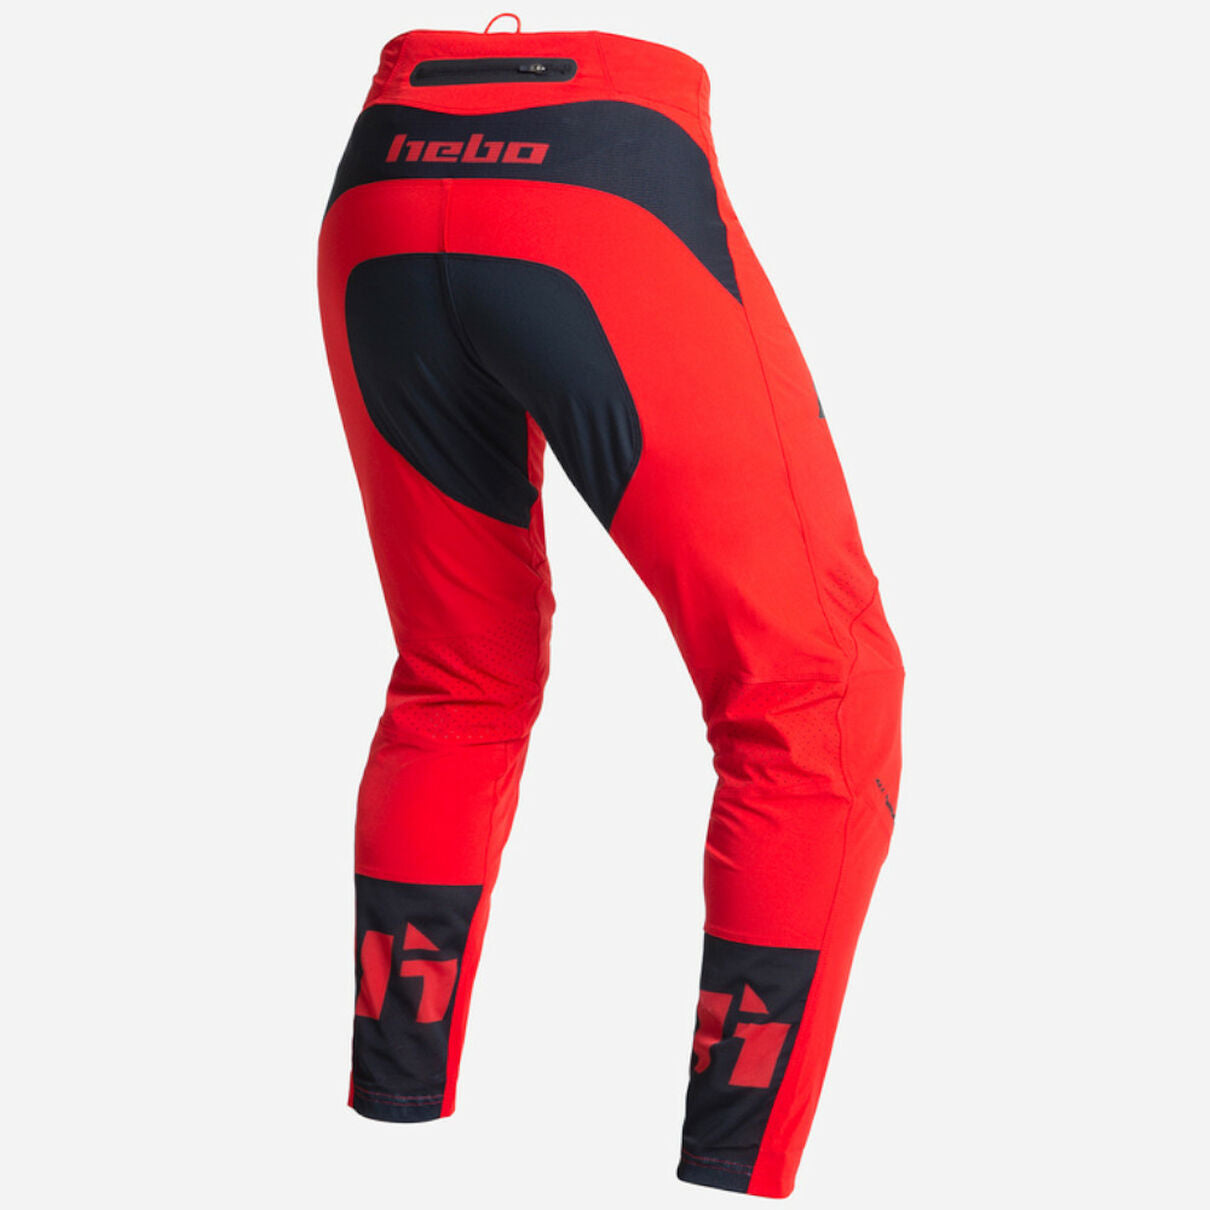 Hebo Trials Pant Tech Red